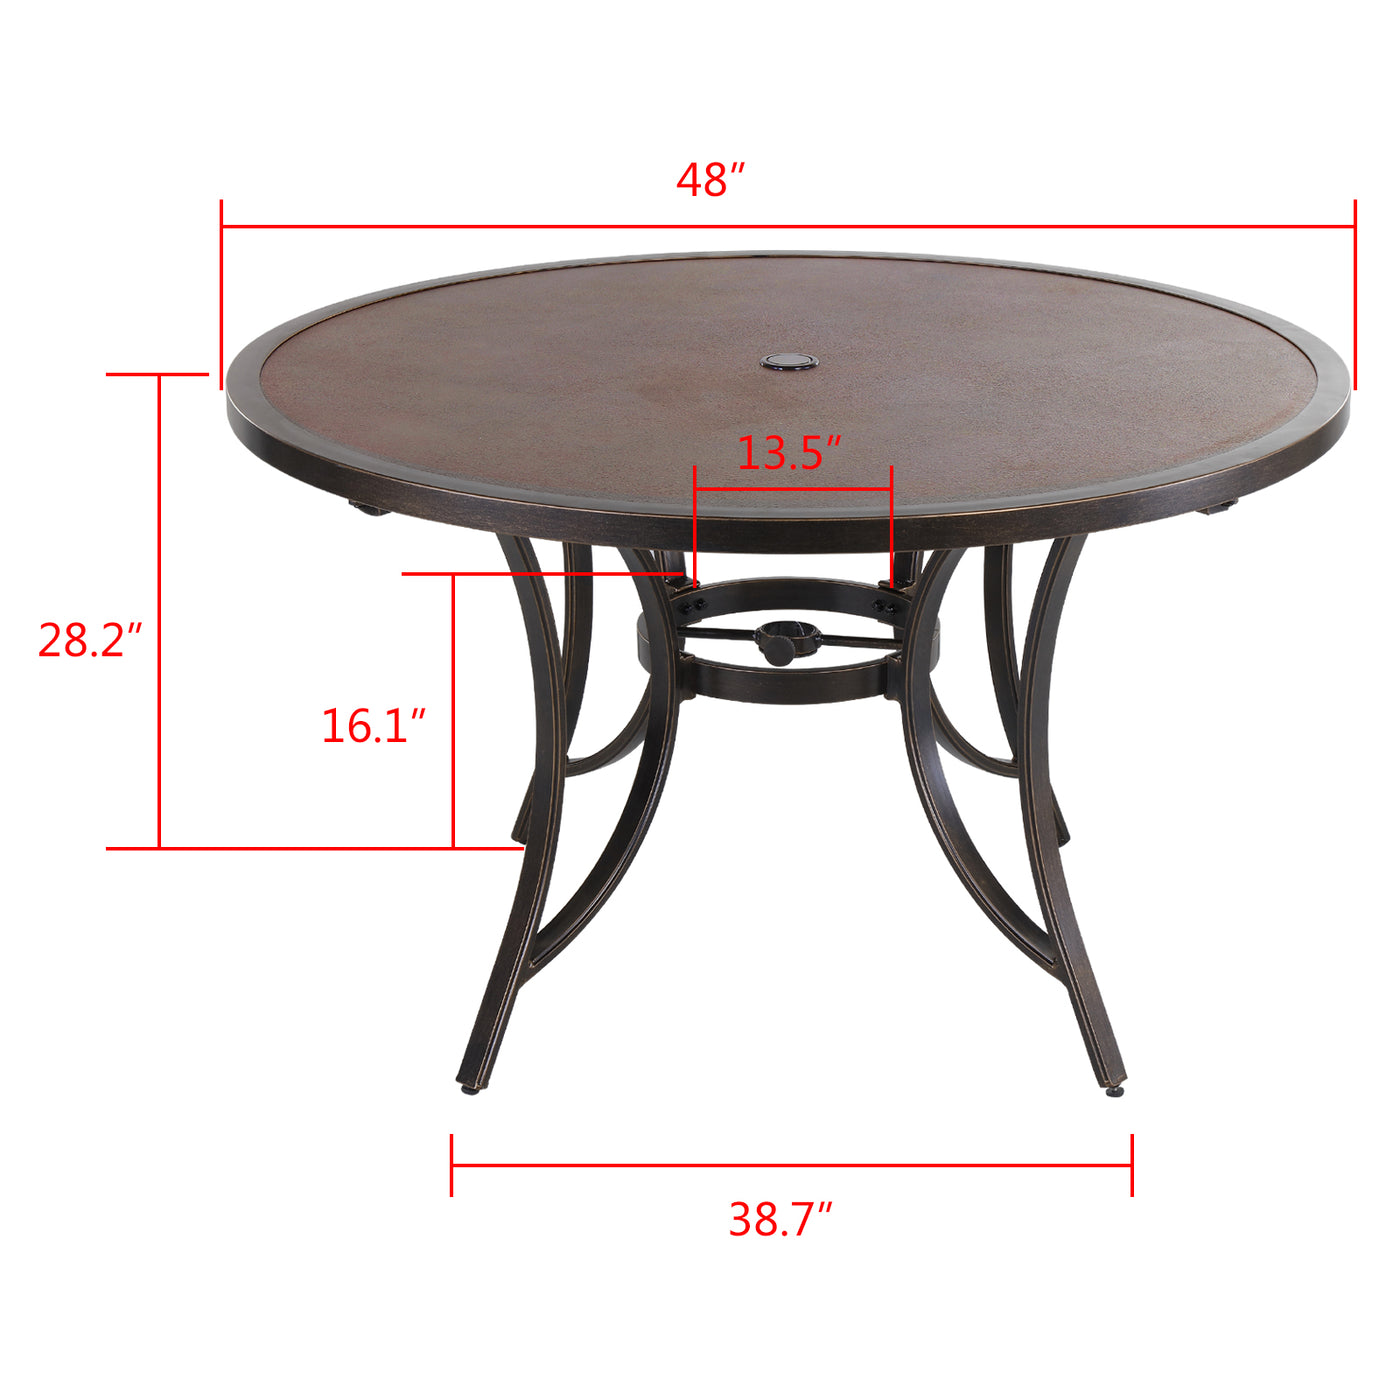 Outdoor 48" Round Table with Umbrella Hole Cast Aluminum Heavy Duty Dining Table